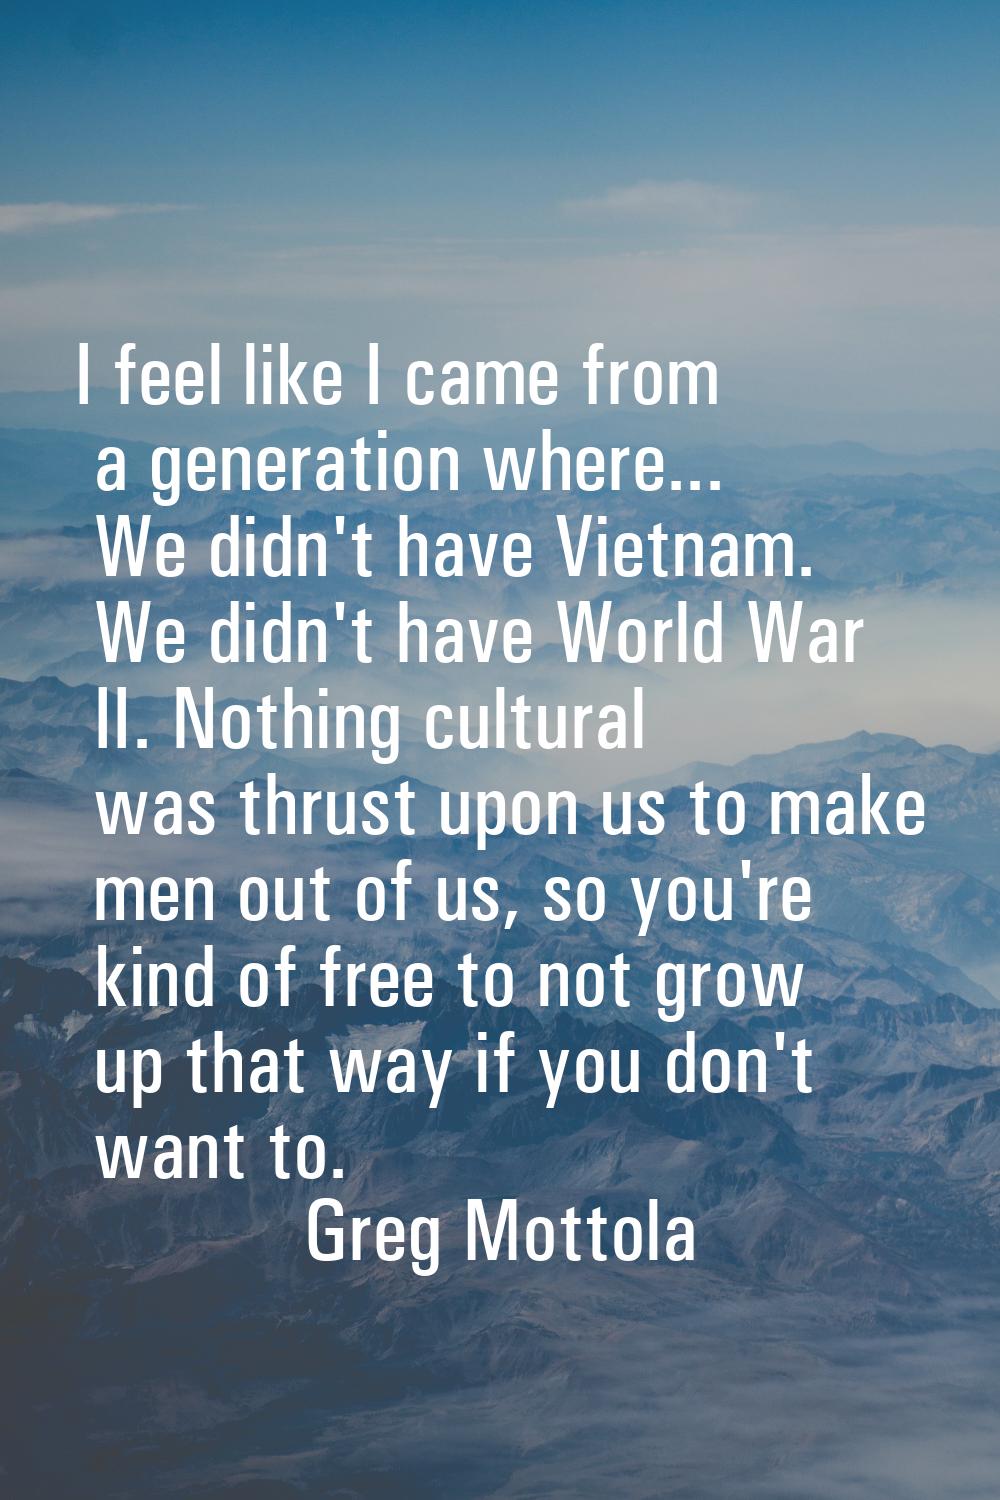 I feel like I came from a generation where... We didn't have Vietnam. We didn't have World War II. 